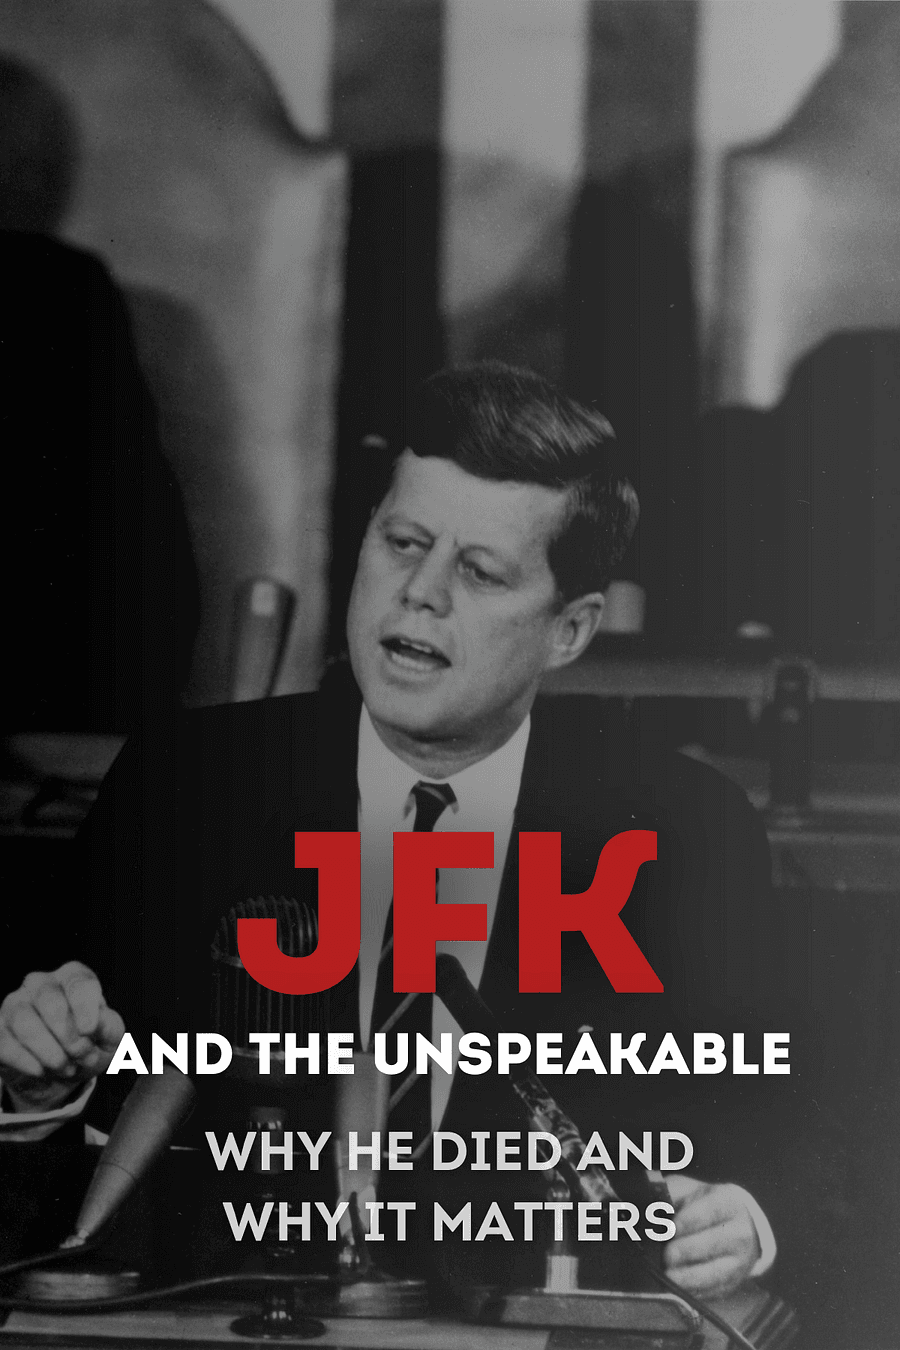 JFK and the Unspeakable by James W. Douglass - Book Summary